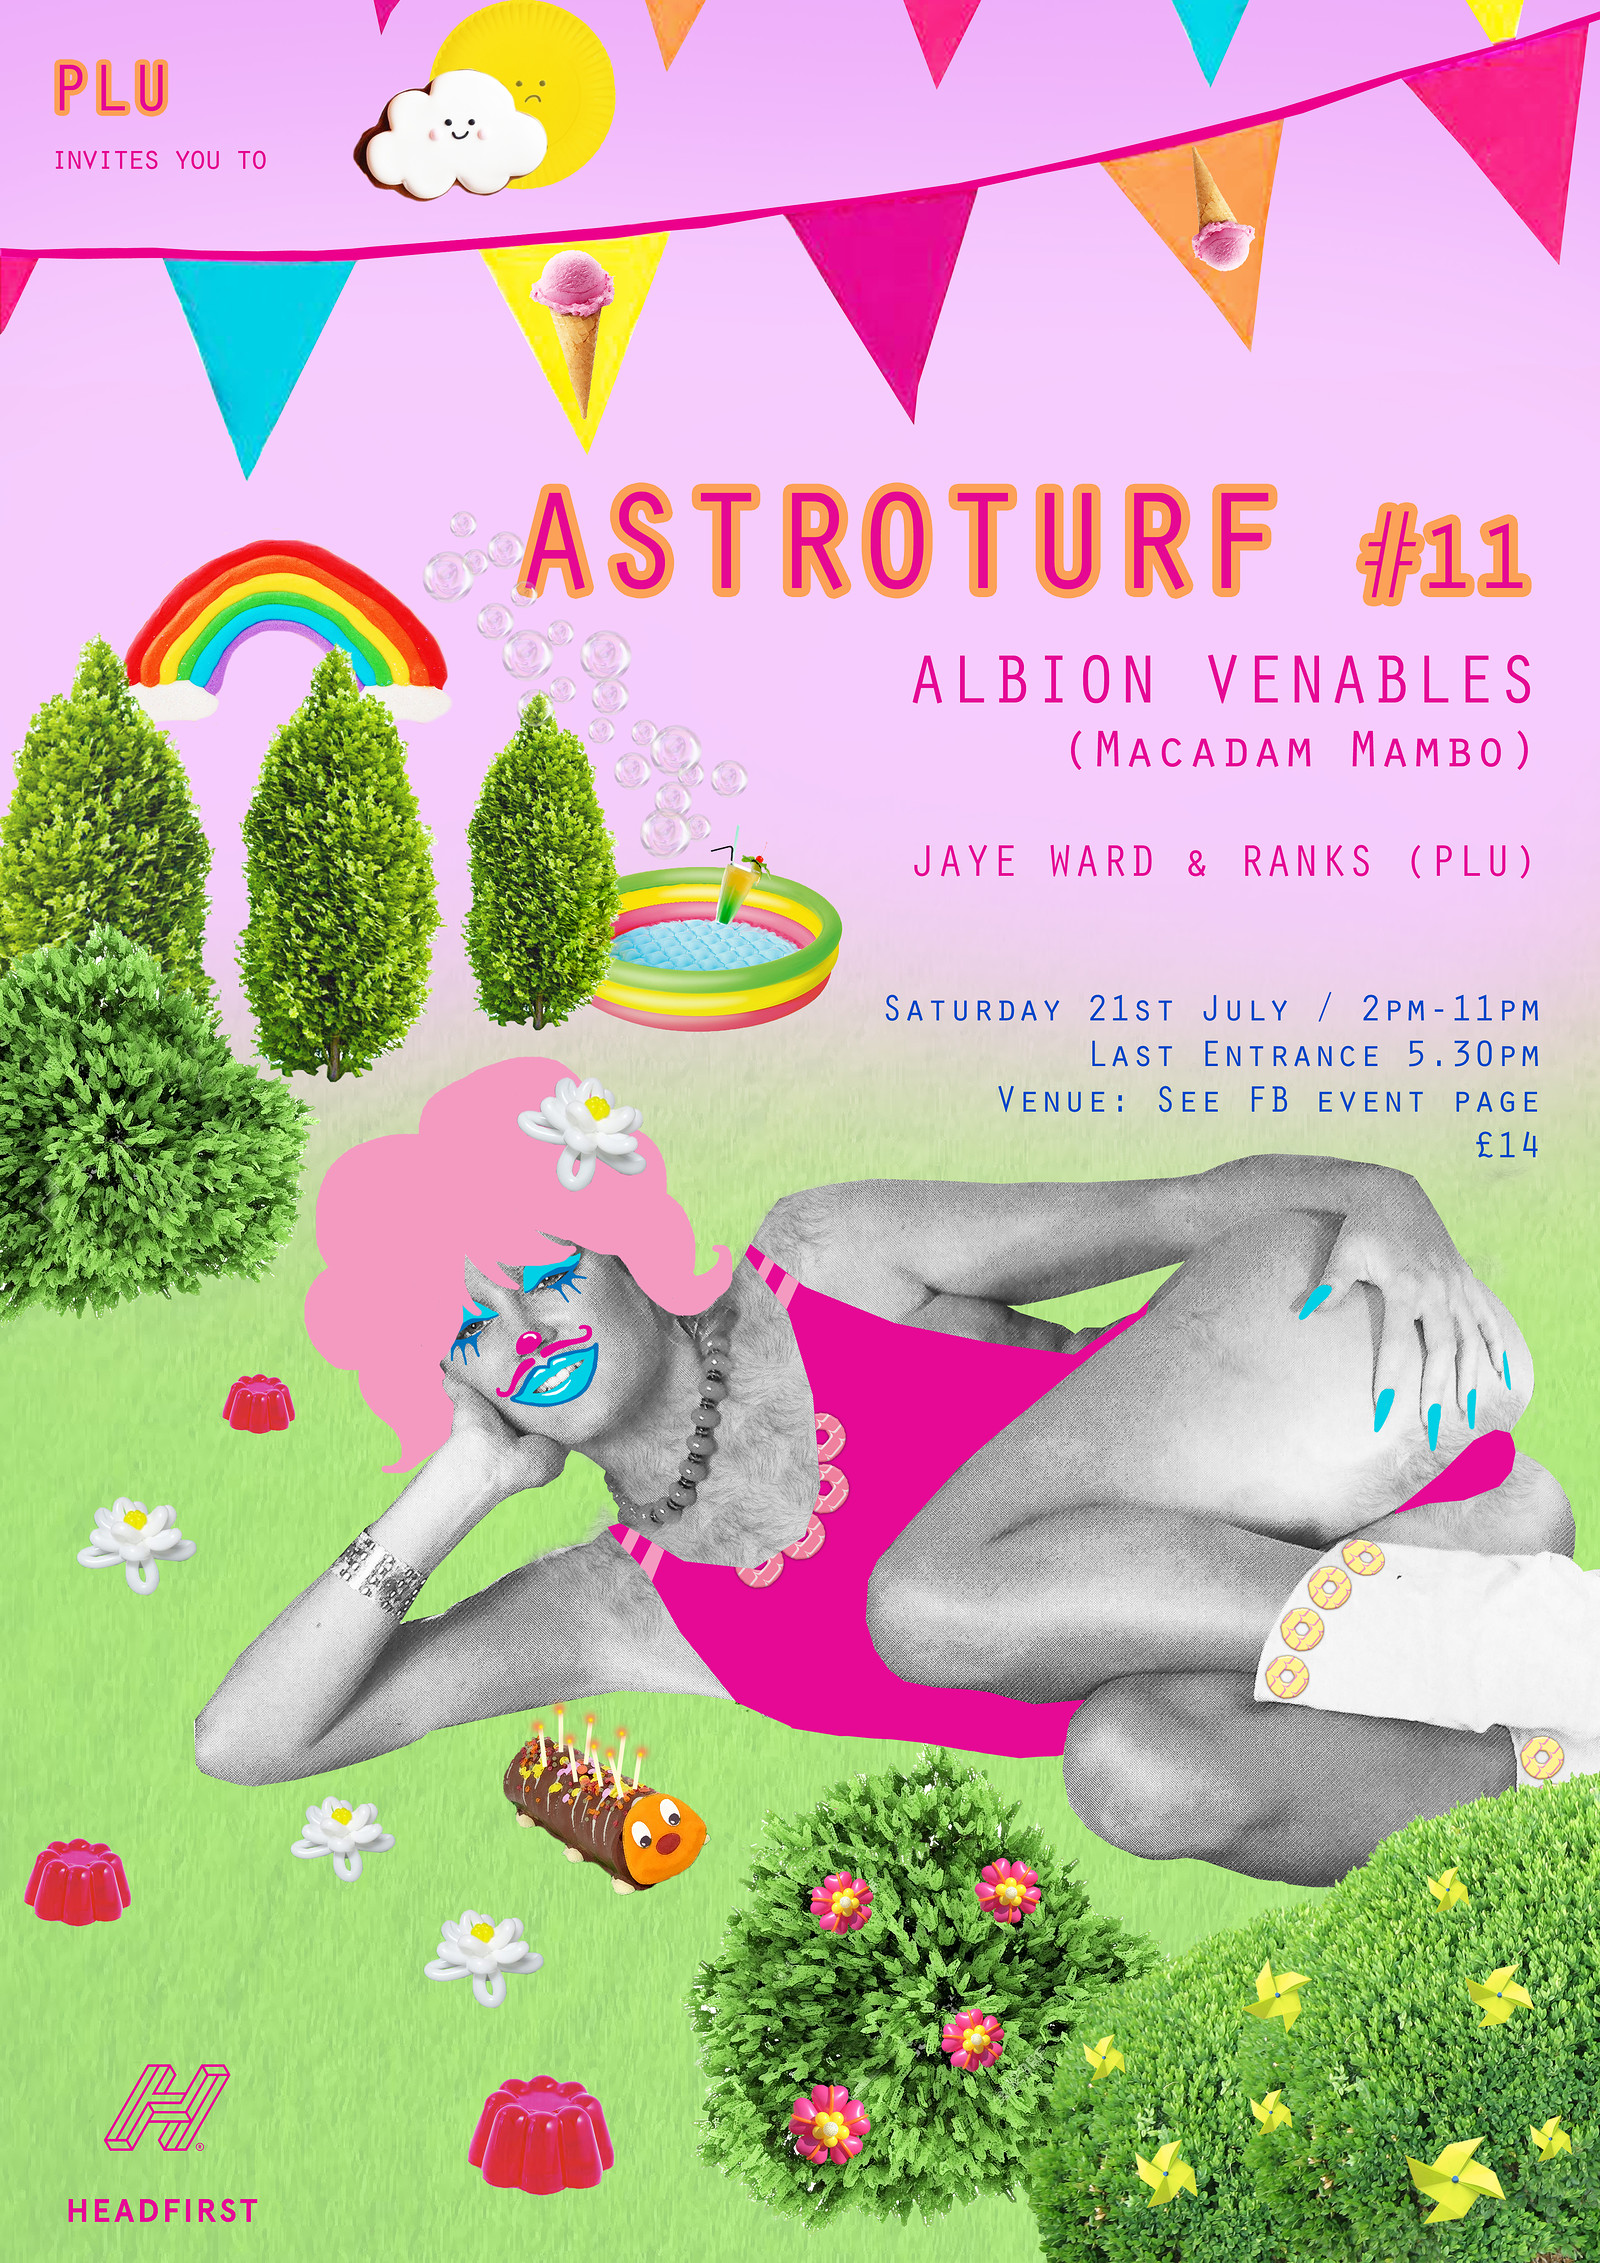 PLU - AstroTurf #11 with Albion Venables at DARE2